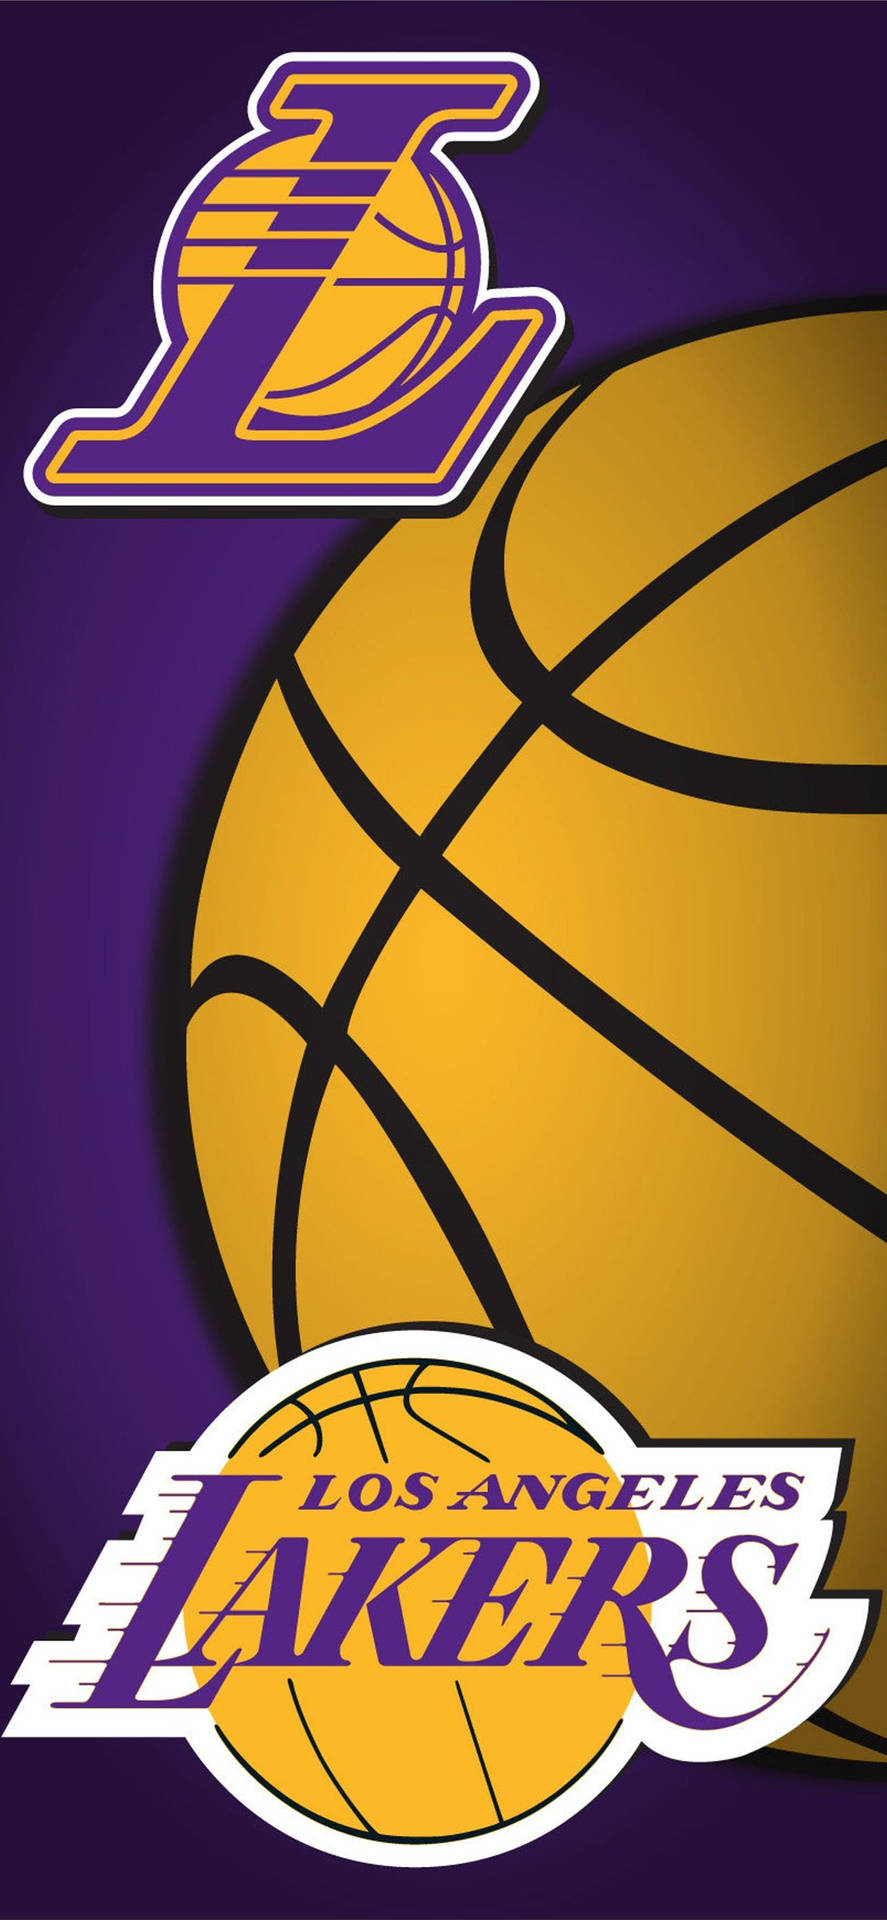 Show Your Support for the Lakers with Your Iphone! Wallpaper